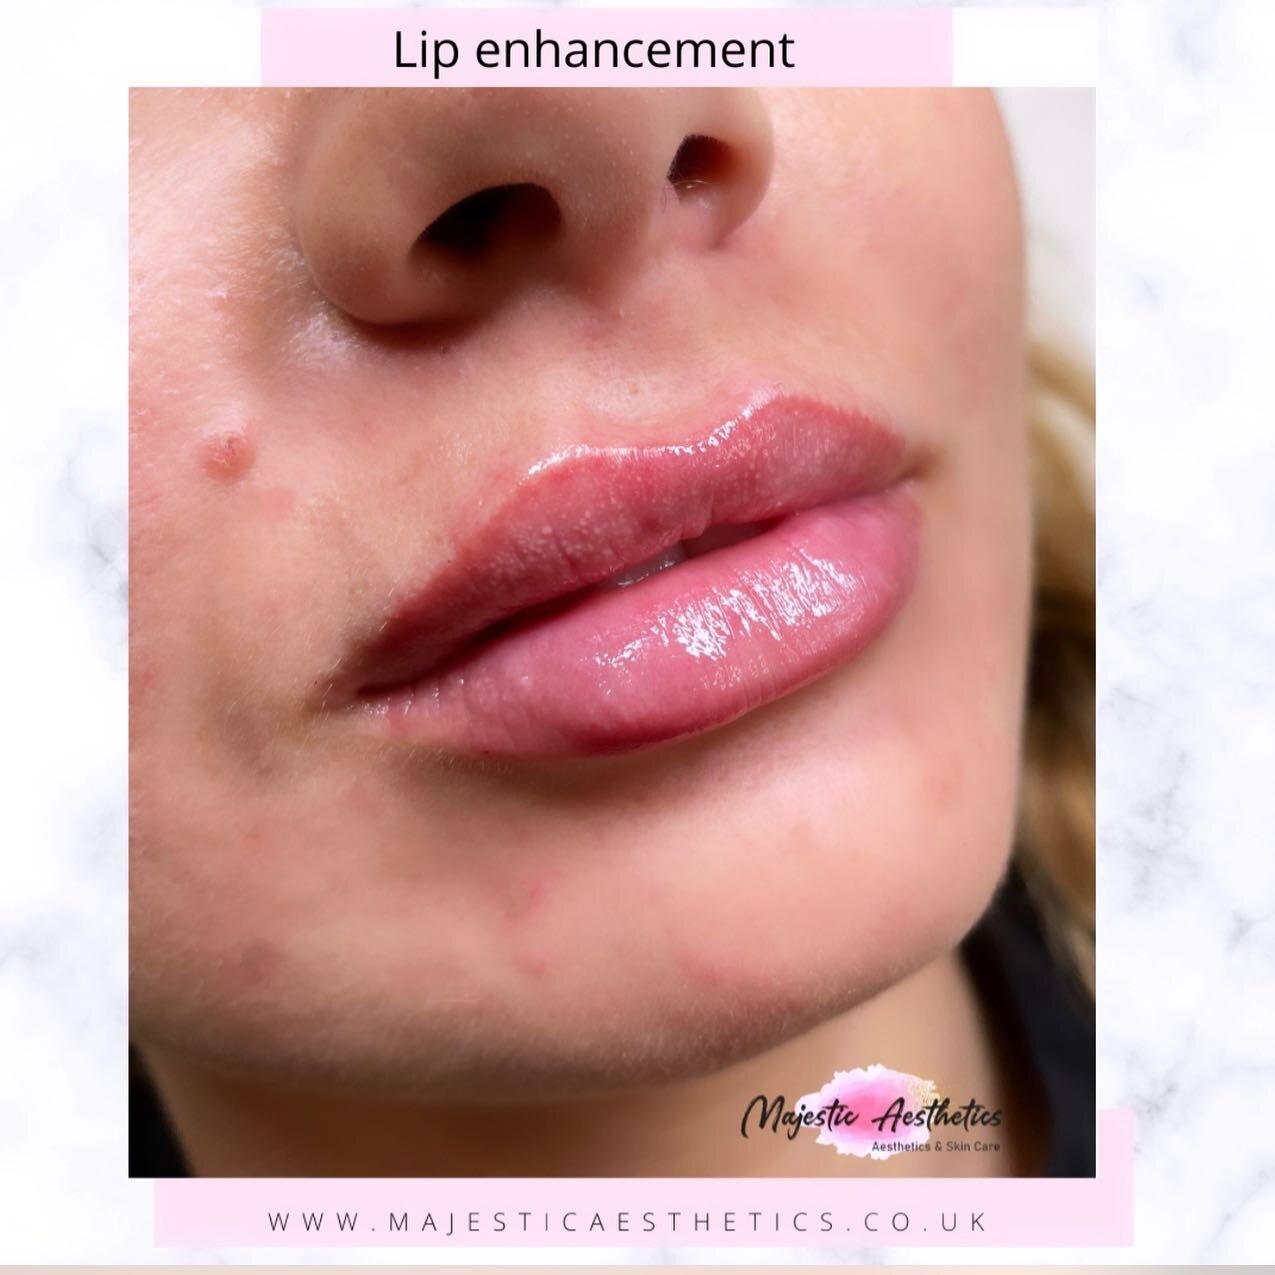 👄 Lip enhancement 👄

💉Topical numbing used prior to treatment.
💉Registered midwife / aesthetics practitioner.
💉Newly qualified nurse prescriber
💉Insured and regulated
📍Portsmouth

For all bookings; 
📩 info@majesticaesthetics.co.uk
Or DM 📱 @m